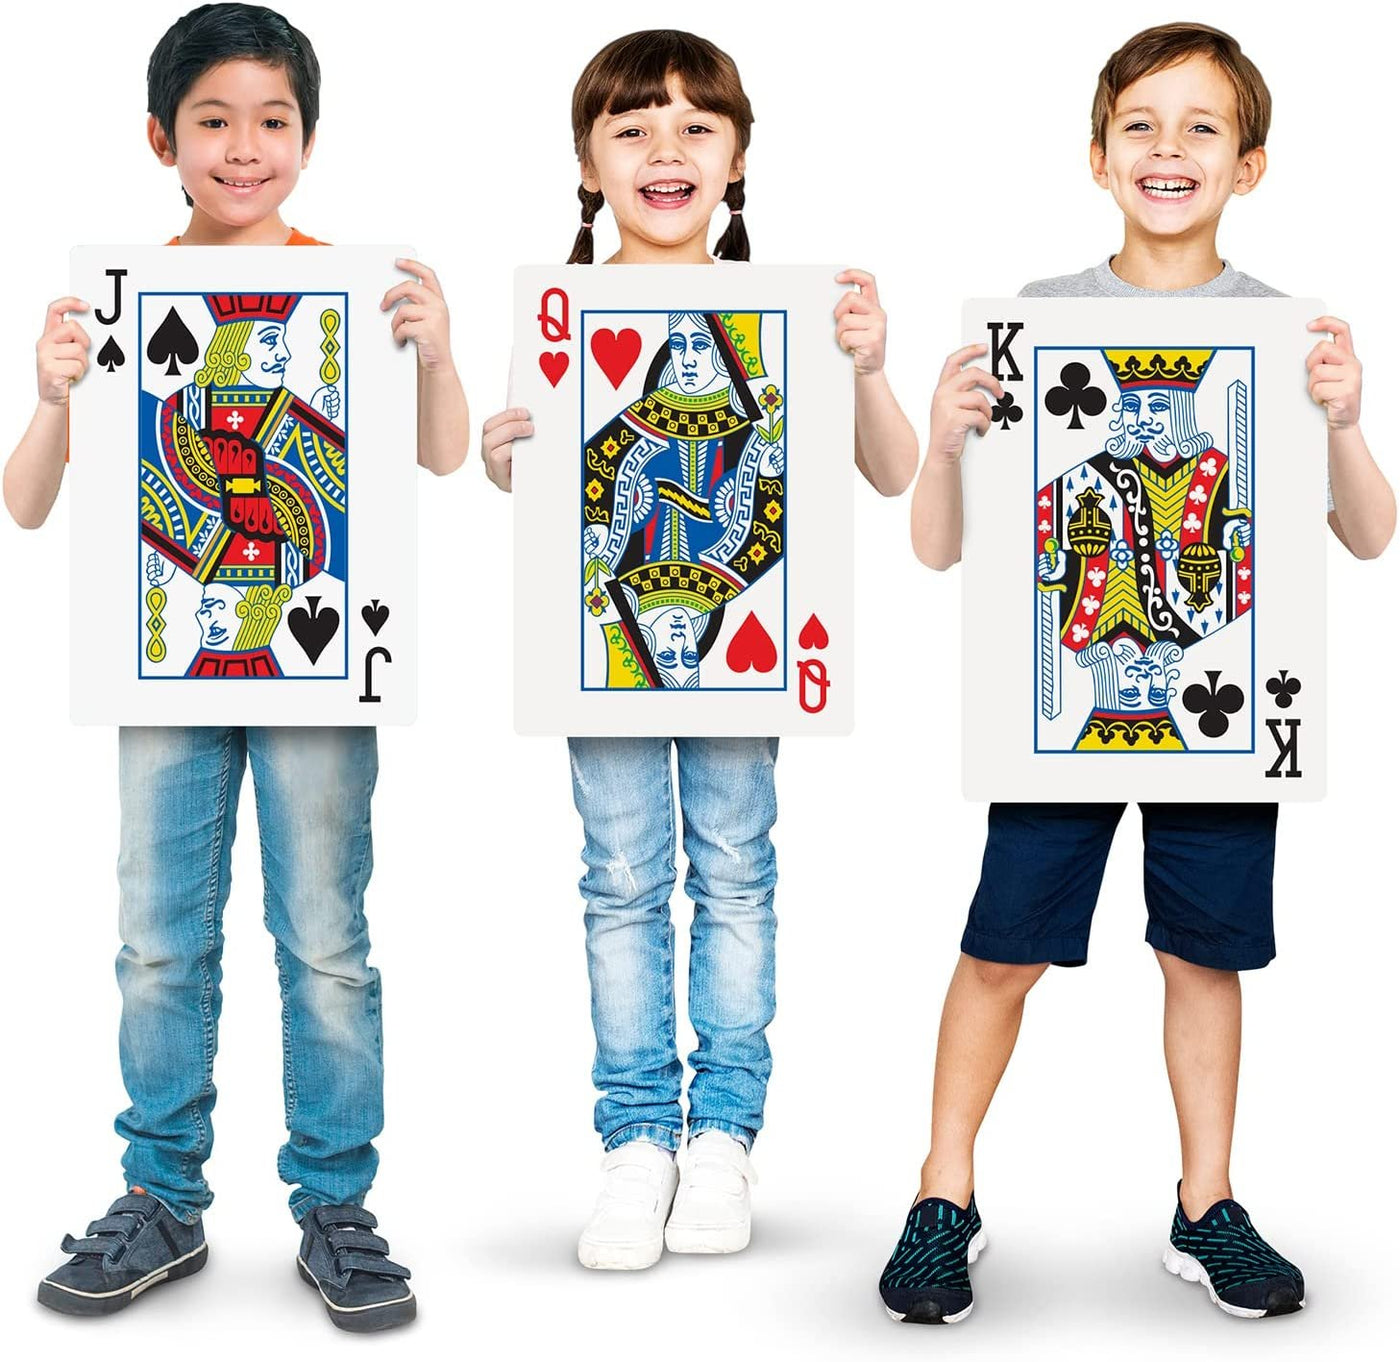 Gamie Jumbo Giant Poker Playing Cards Deck - 10.5"es X 14.5"es - Extra Large Card Set with 2 Jokers - Huge Casino Game Cards for Kids and Adults - Oversize Poker Party Decorations - 1 Pack